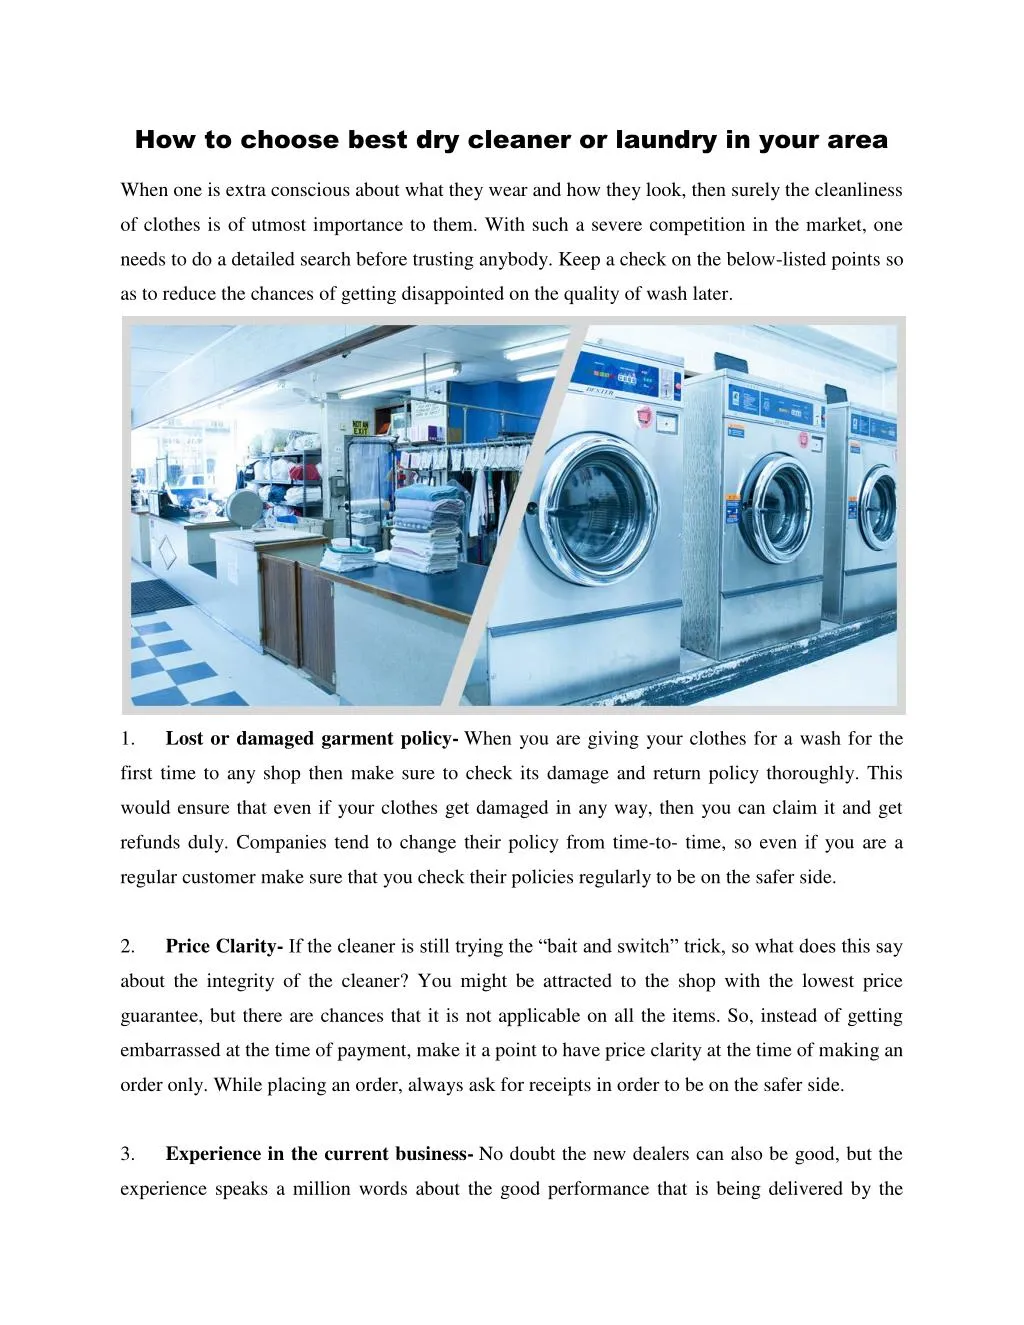 how to choose best dry cleaner or laundry in your